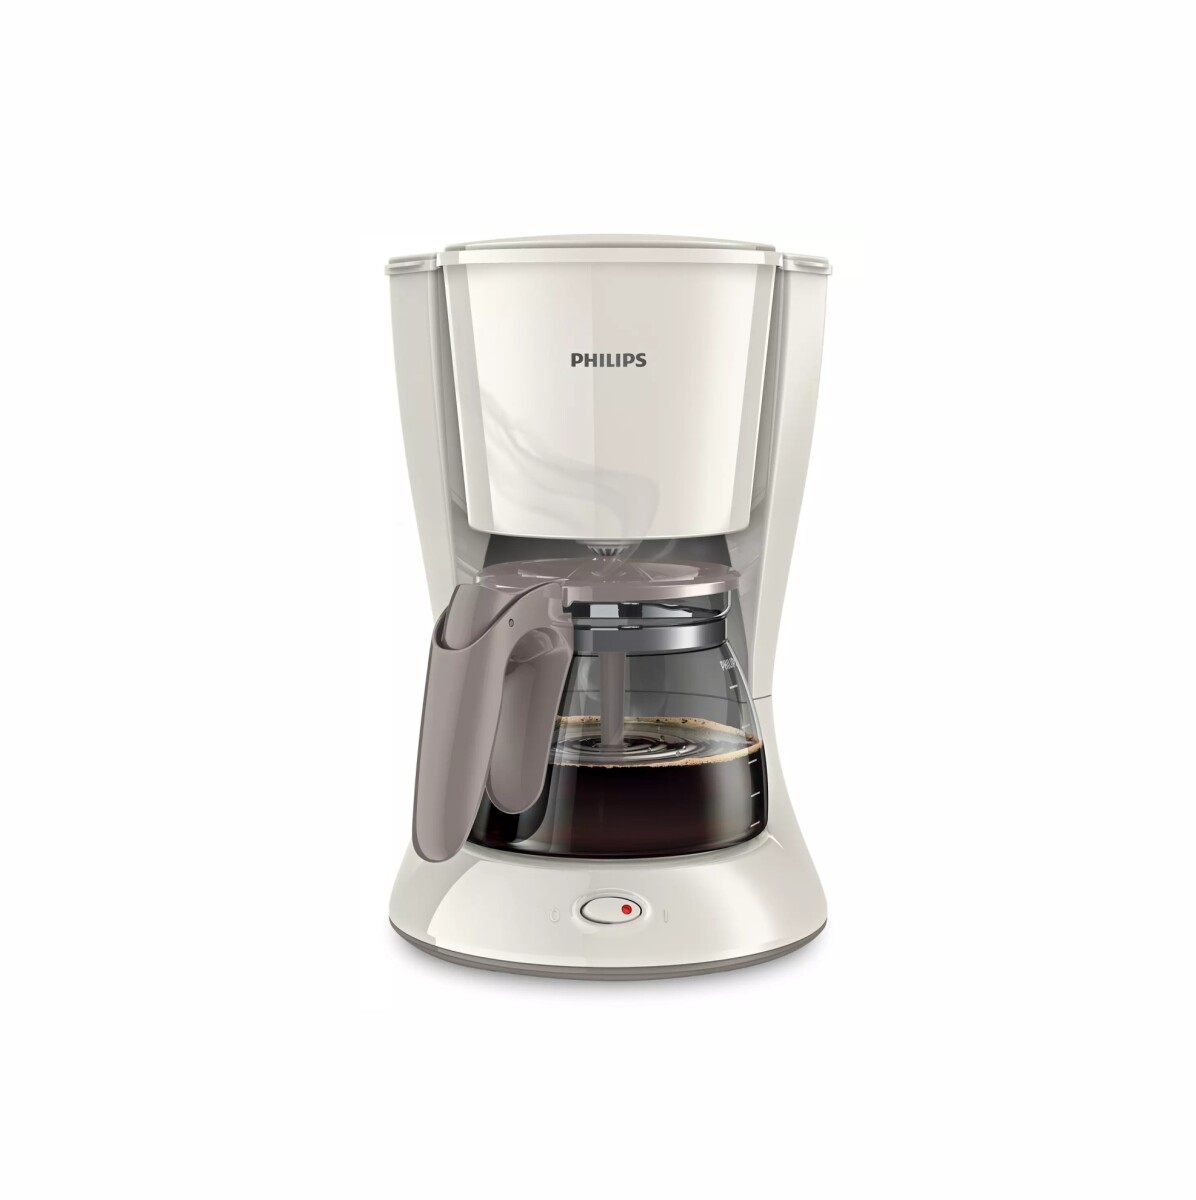 CAFETERA PHILIPS MOD. HD7447/00 